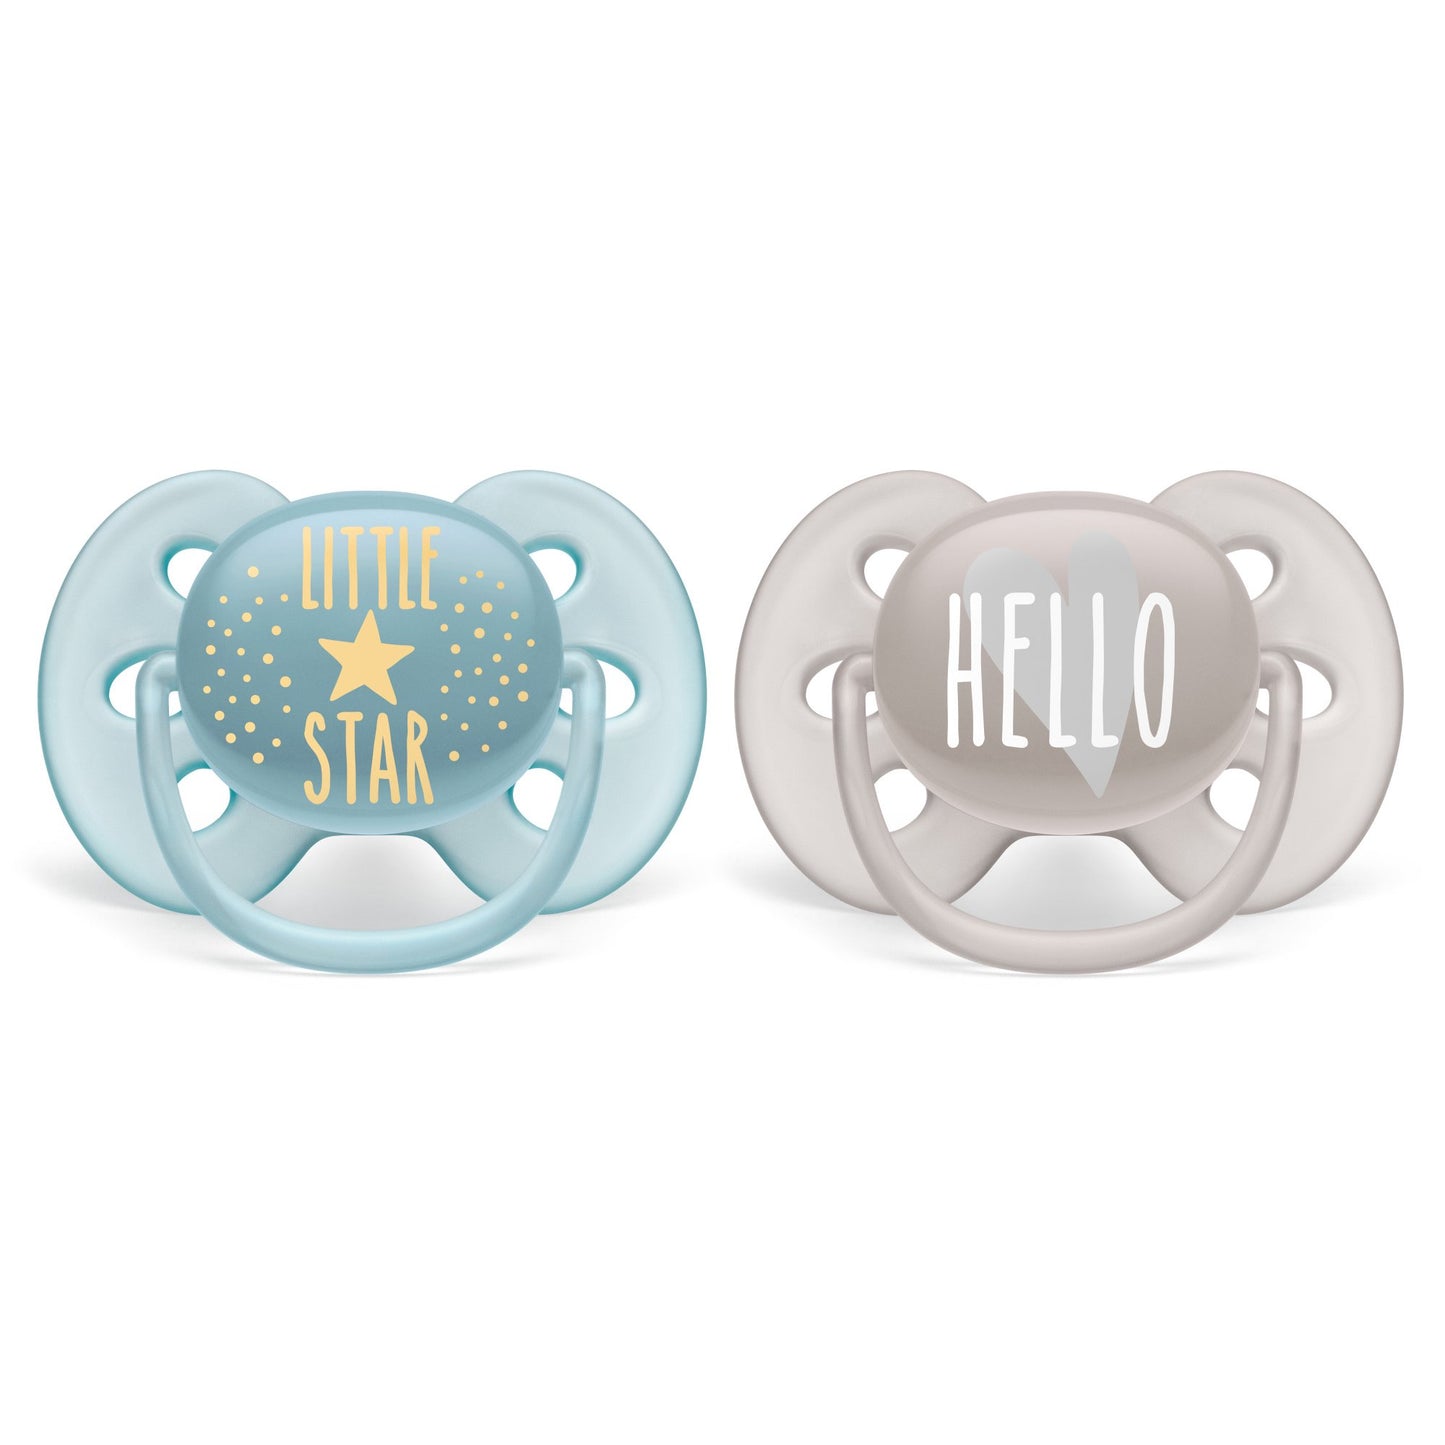 Philips Avent Ultra Soft Pacifier, 6-18 Months, Little Star and Hello Designs, 2 Pack